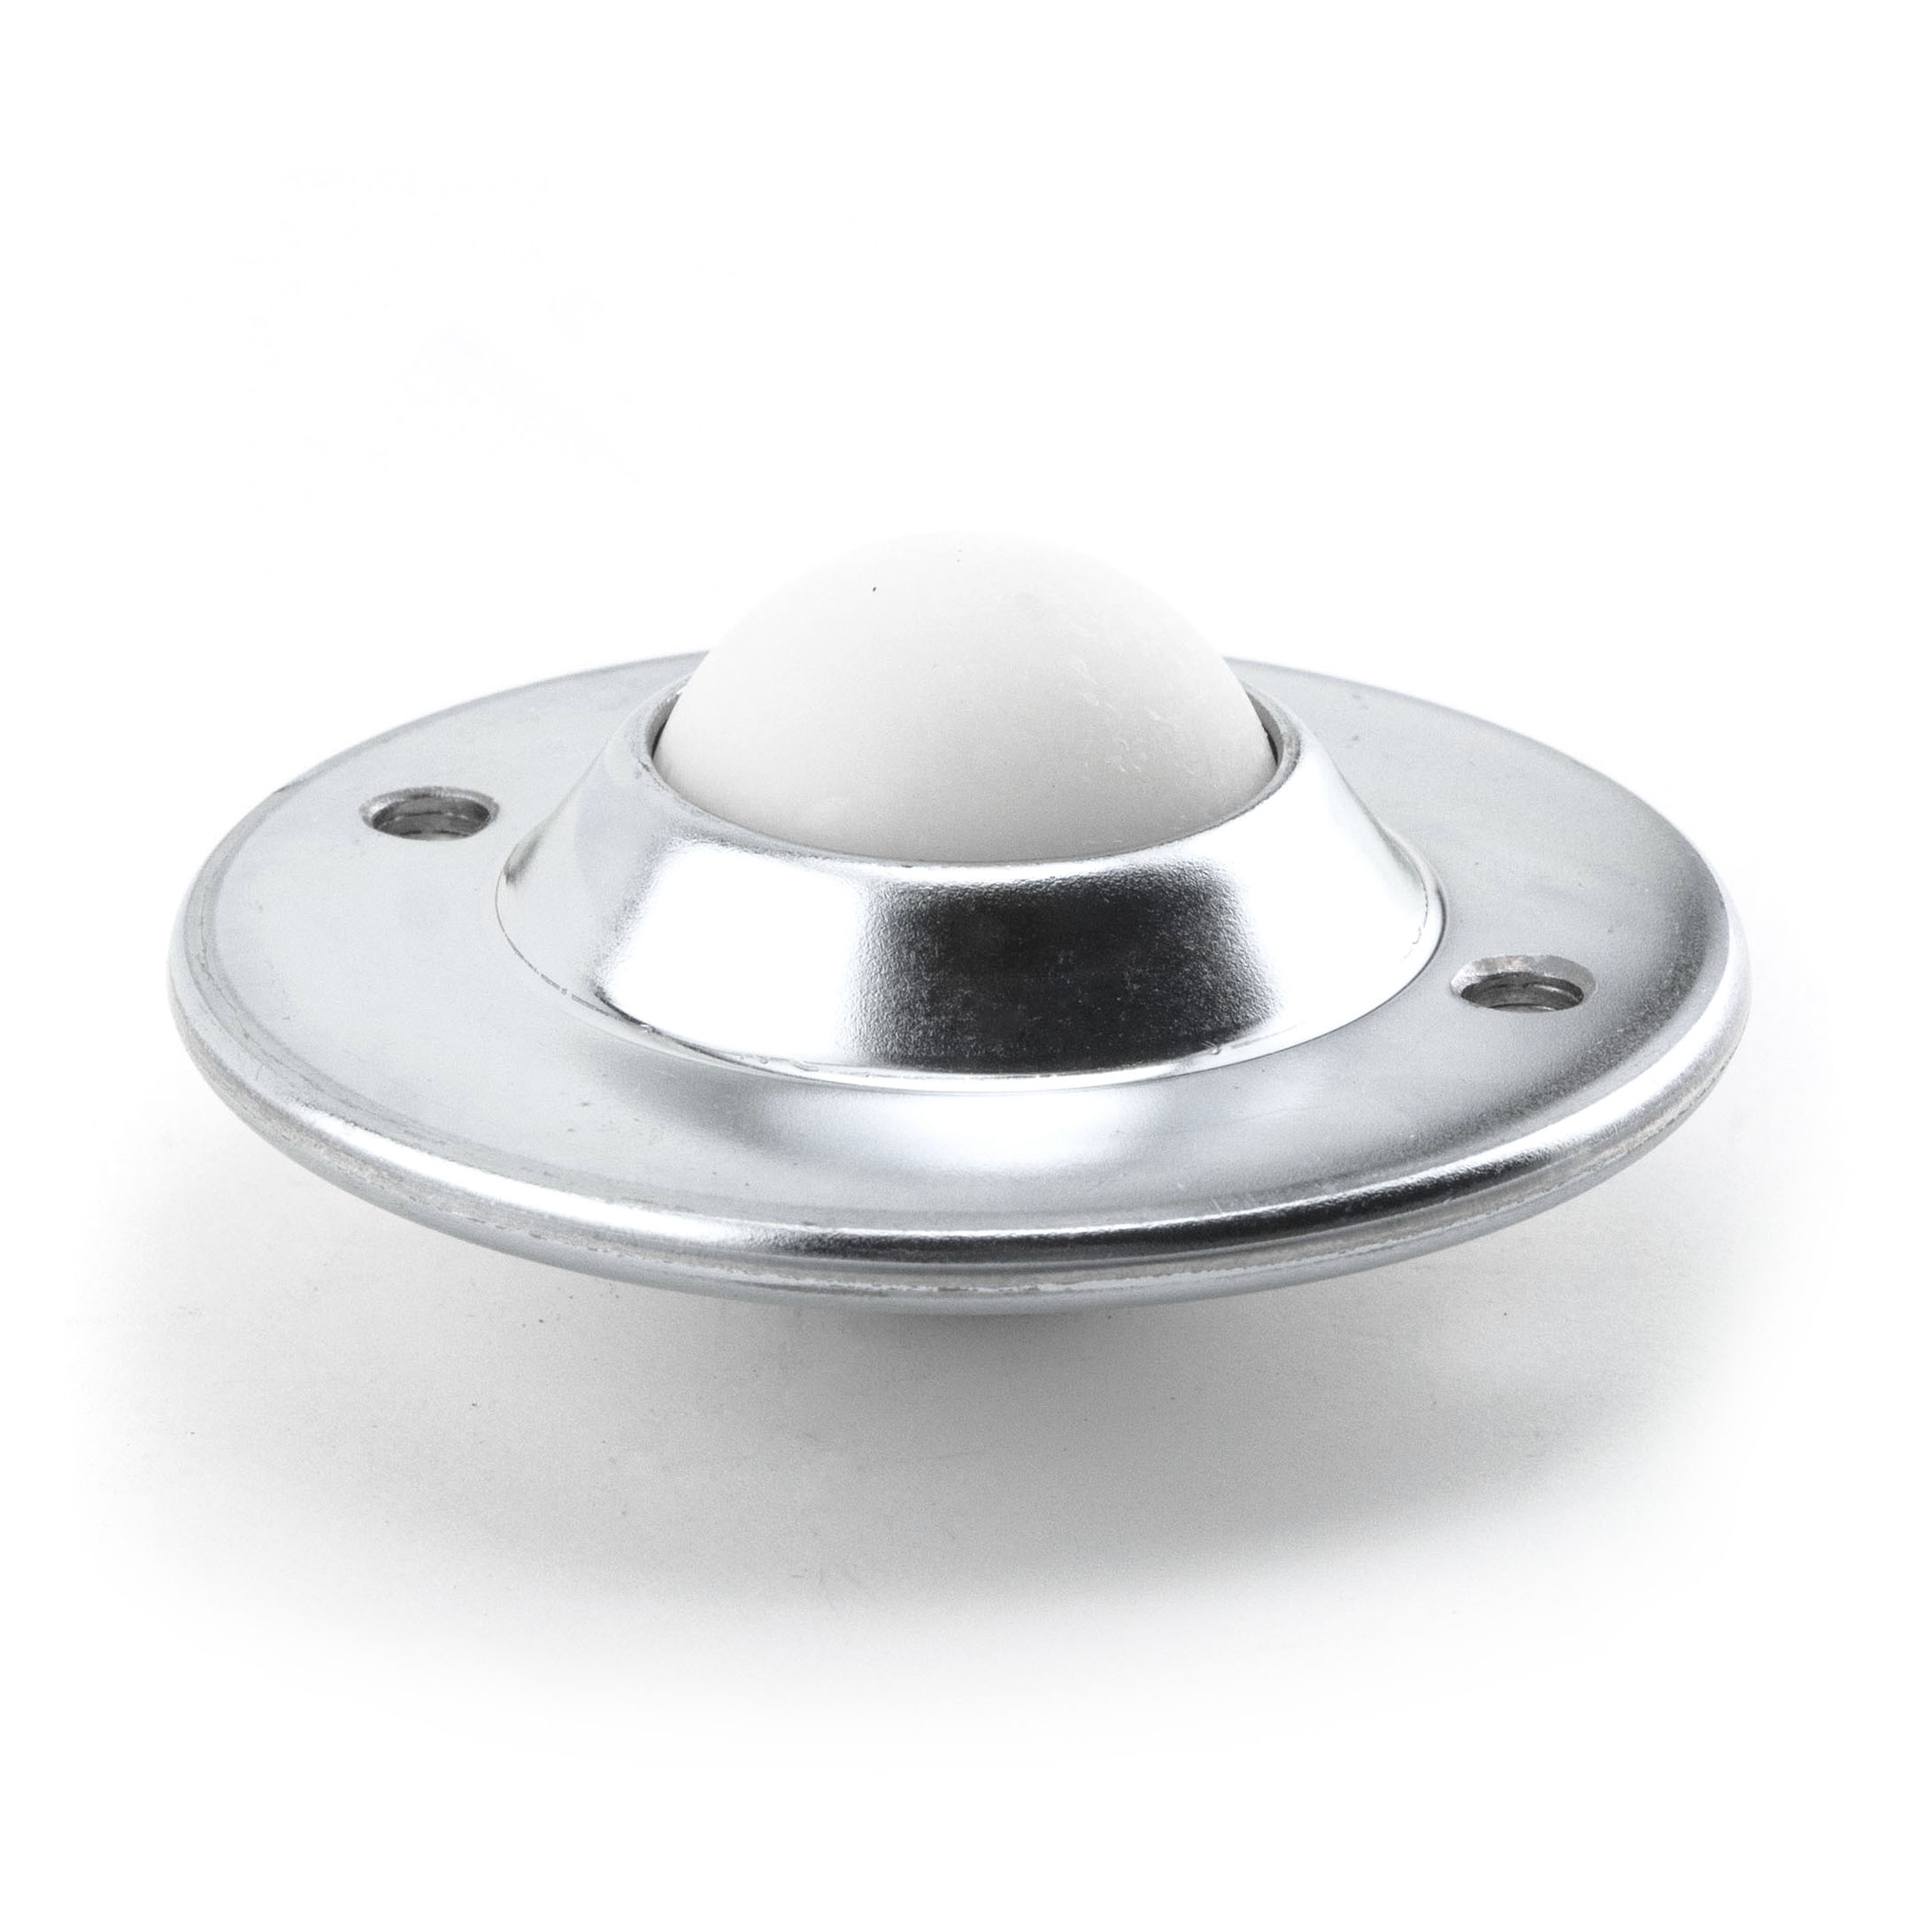 Ball Transfer; 1"; Nylon Ball; Flange; Round (2-7/8" diameter: two holes: 2-3/16" apart); Carbon Steel housing; 75#; Load height: 5/8"; Recessed depth 5/8" (Item #88173)